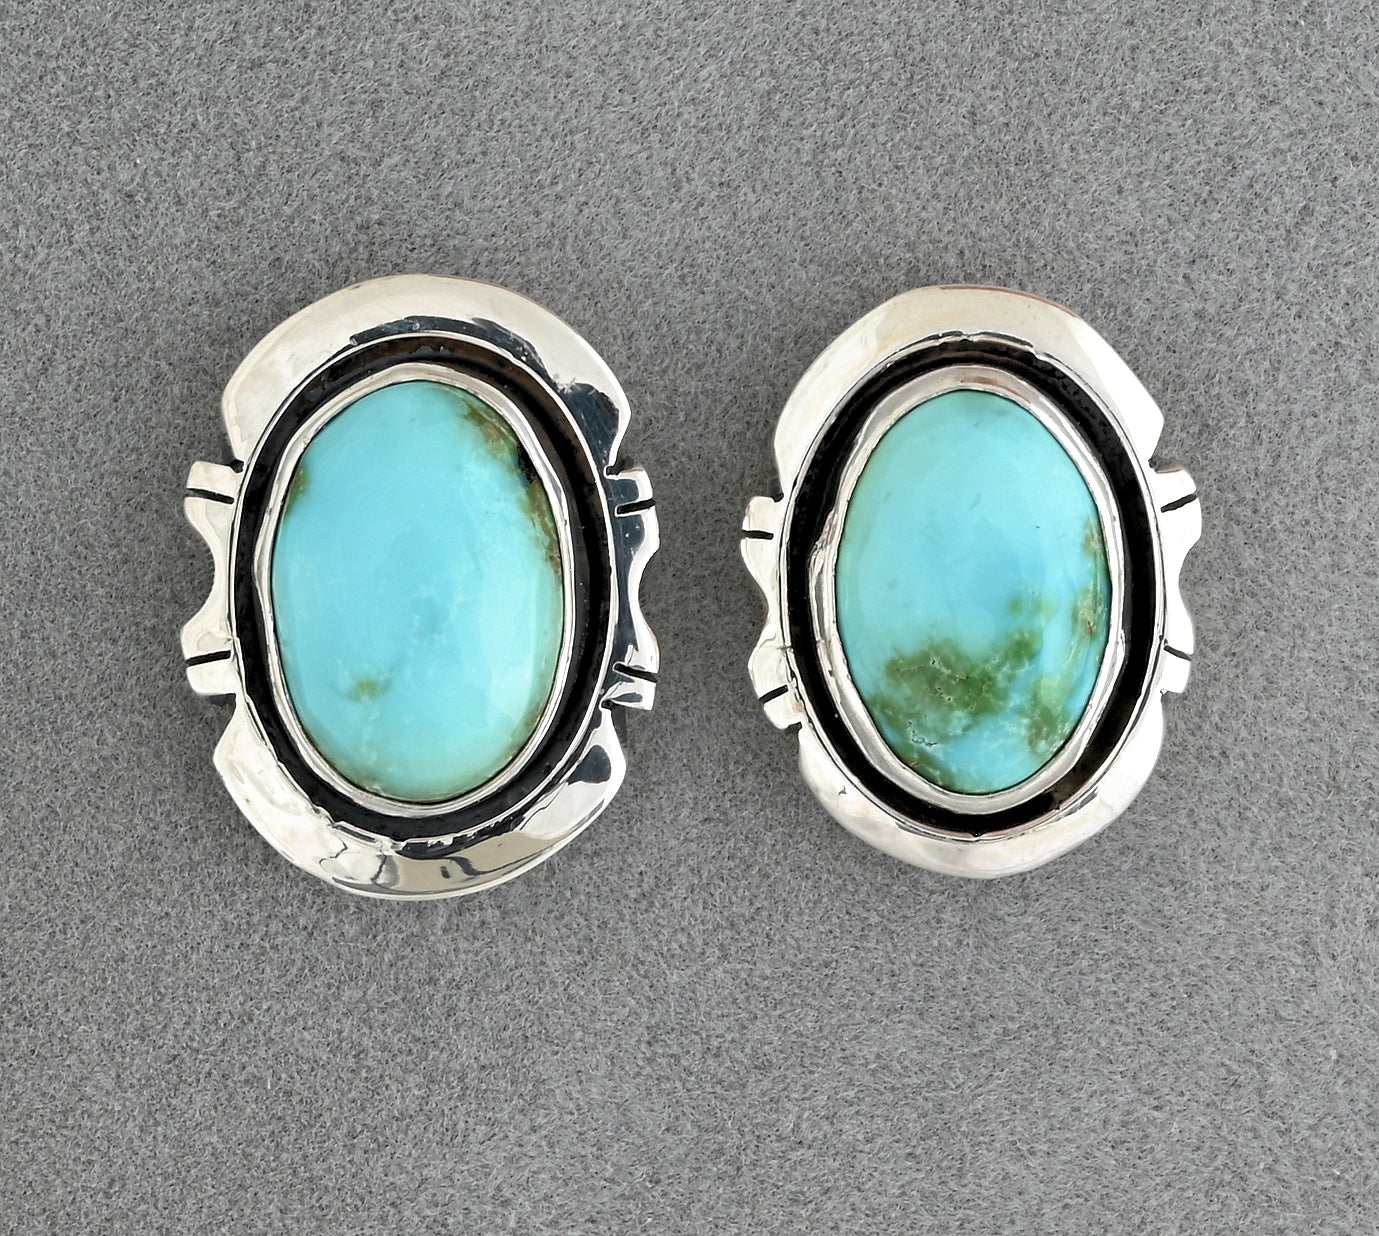 Earrings with Sonoran Gold Turquoise by Phyllis Smith